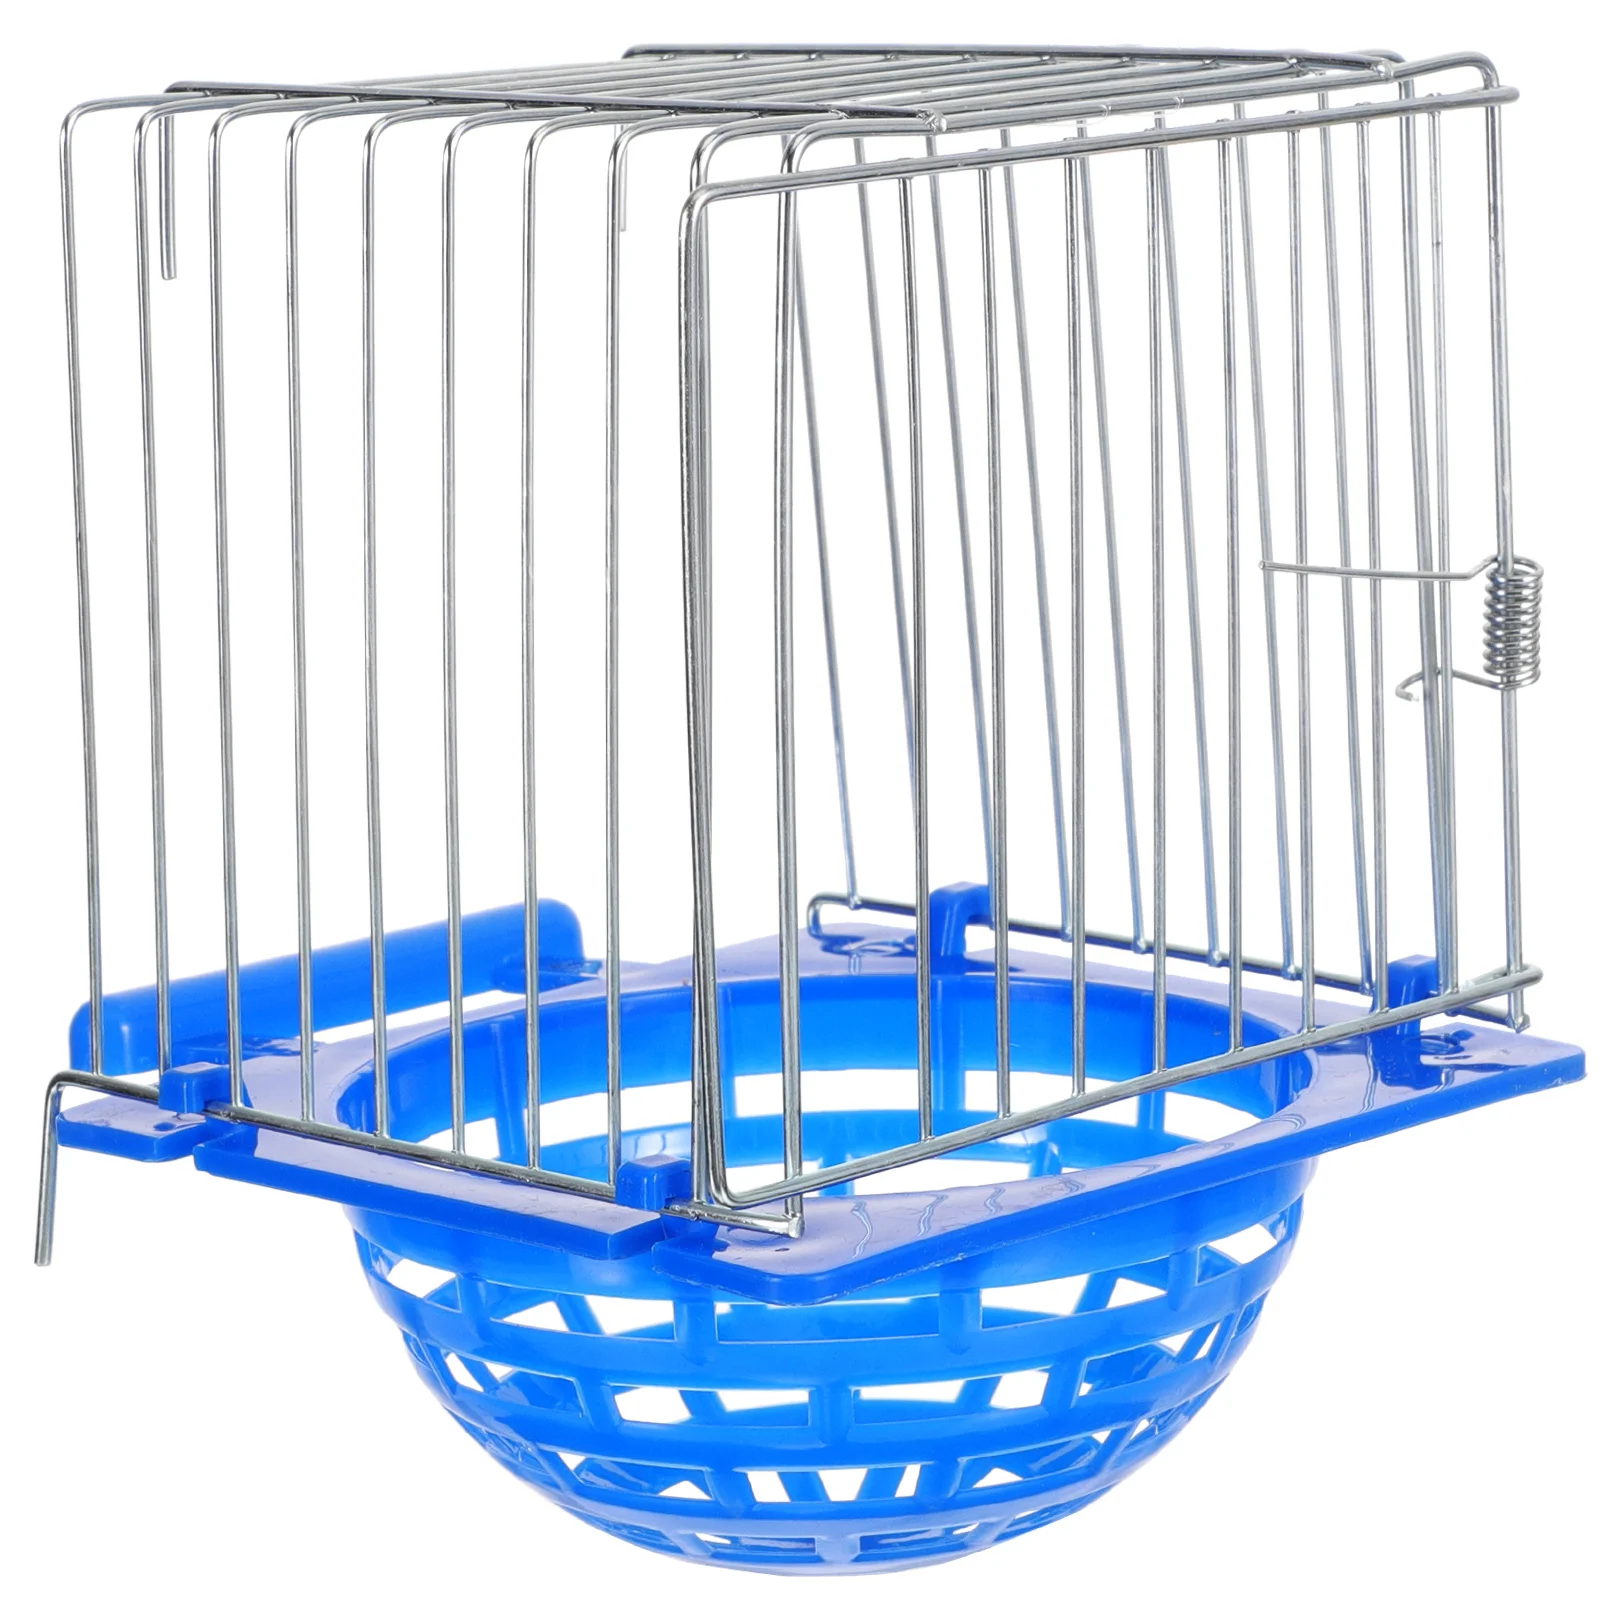 

Nest Bird Cage Basin Pigeon Parrot Breeding Nesting Bowl Hatching Canary Shelter Hanging Holder Hollow Box Cages Cockatiel